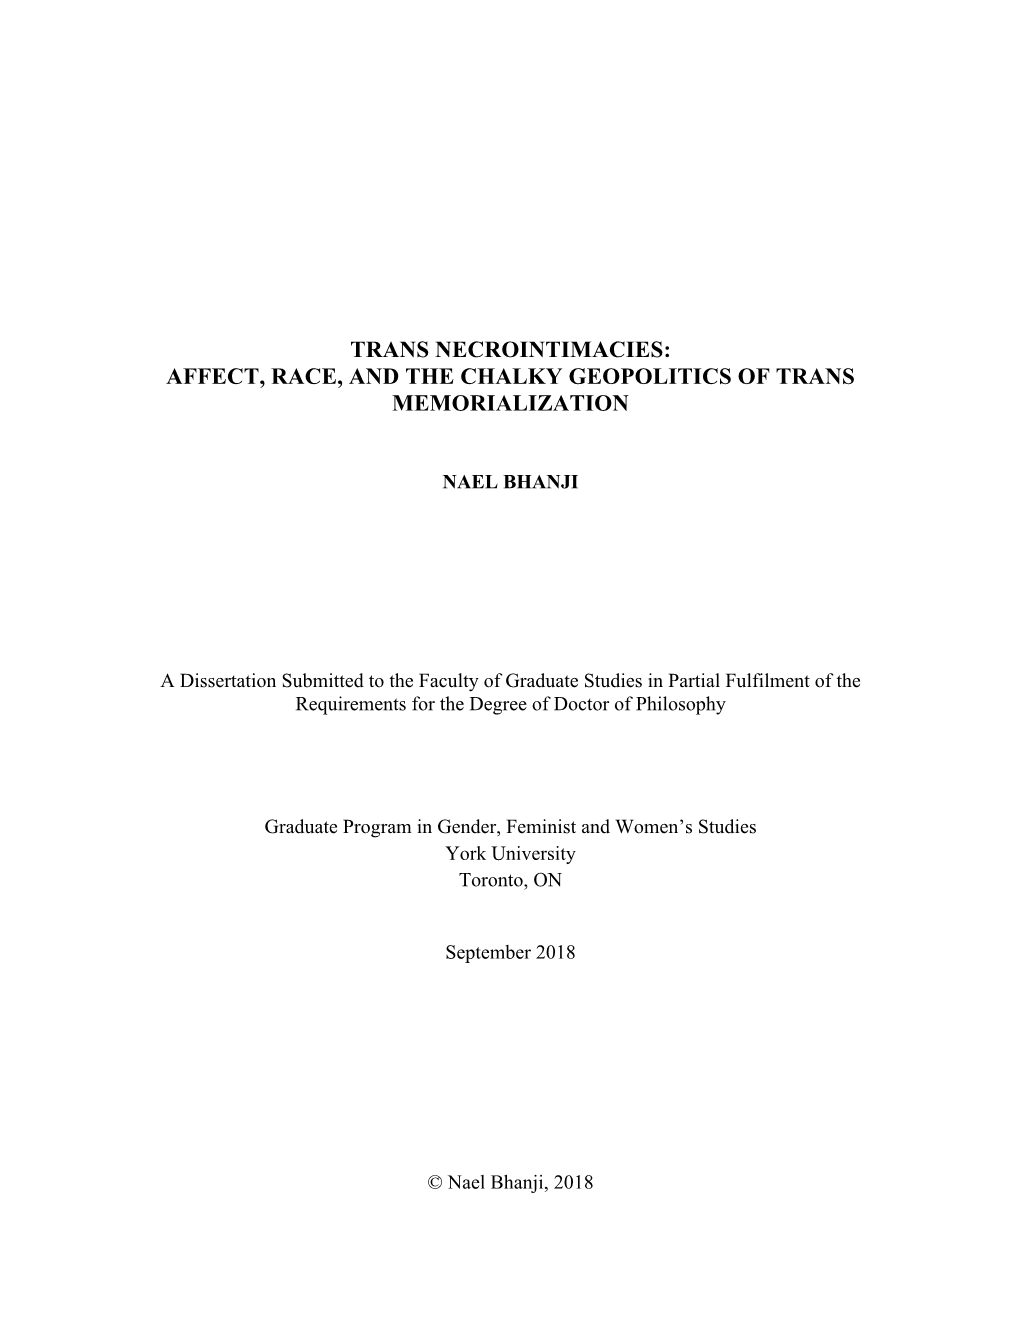 Trans Necrointimacies: Affect, Race, and the Chalky Geopolitics of Trans Memorialization